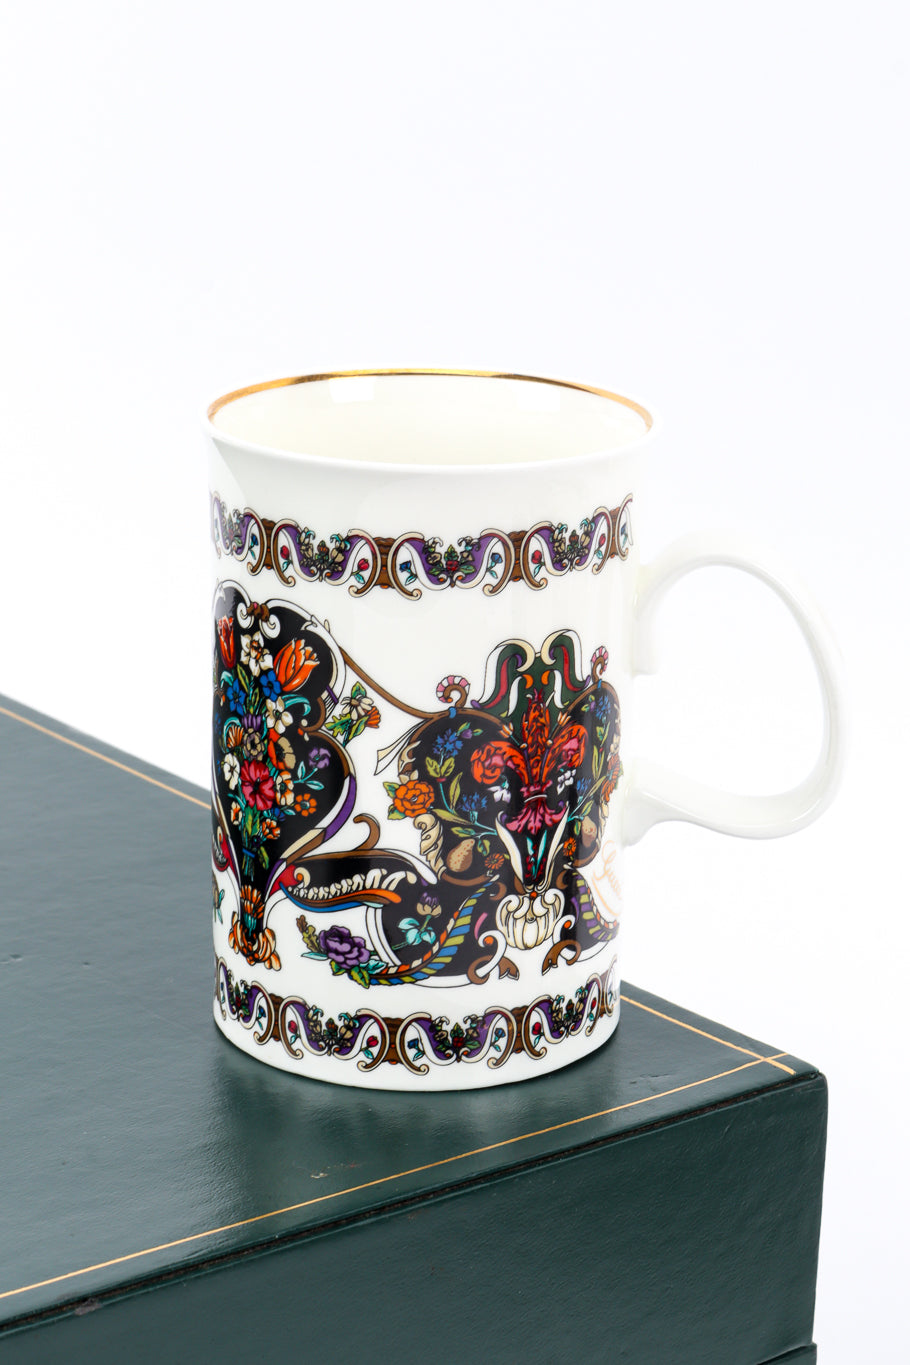 Gilded Floral Signed Mugs Boxed Set by Gucci mug on edge of box @recessla